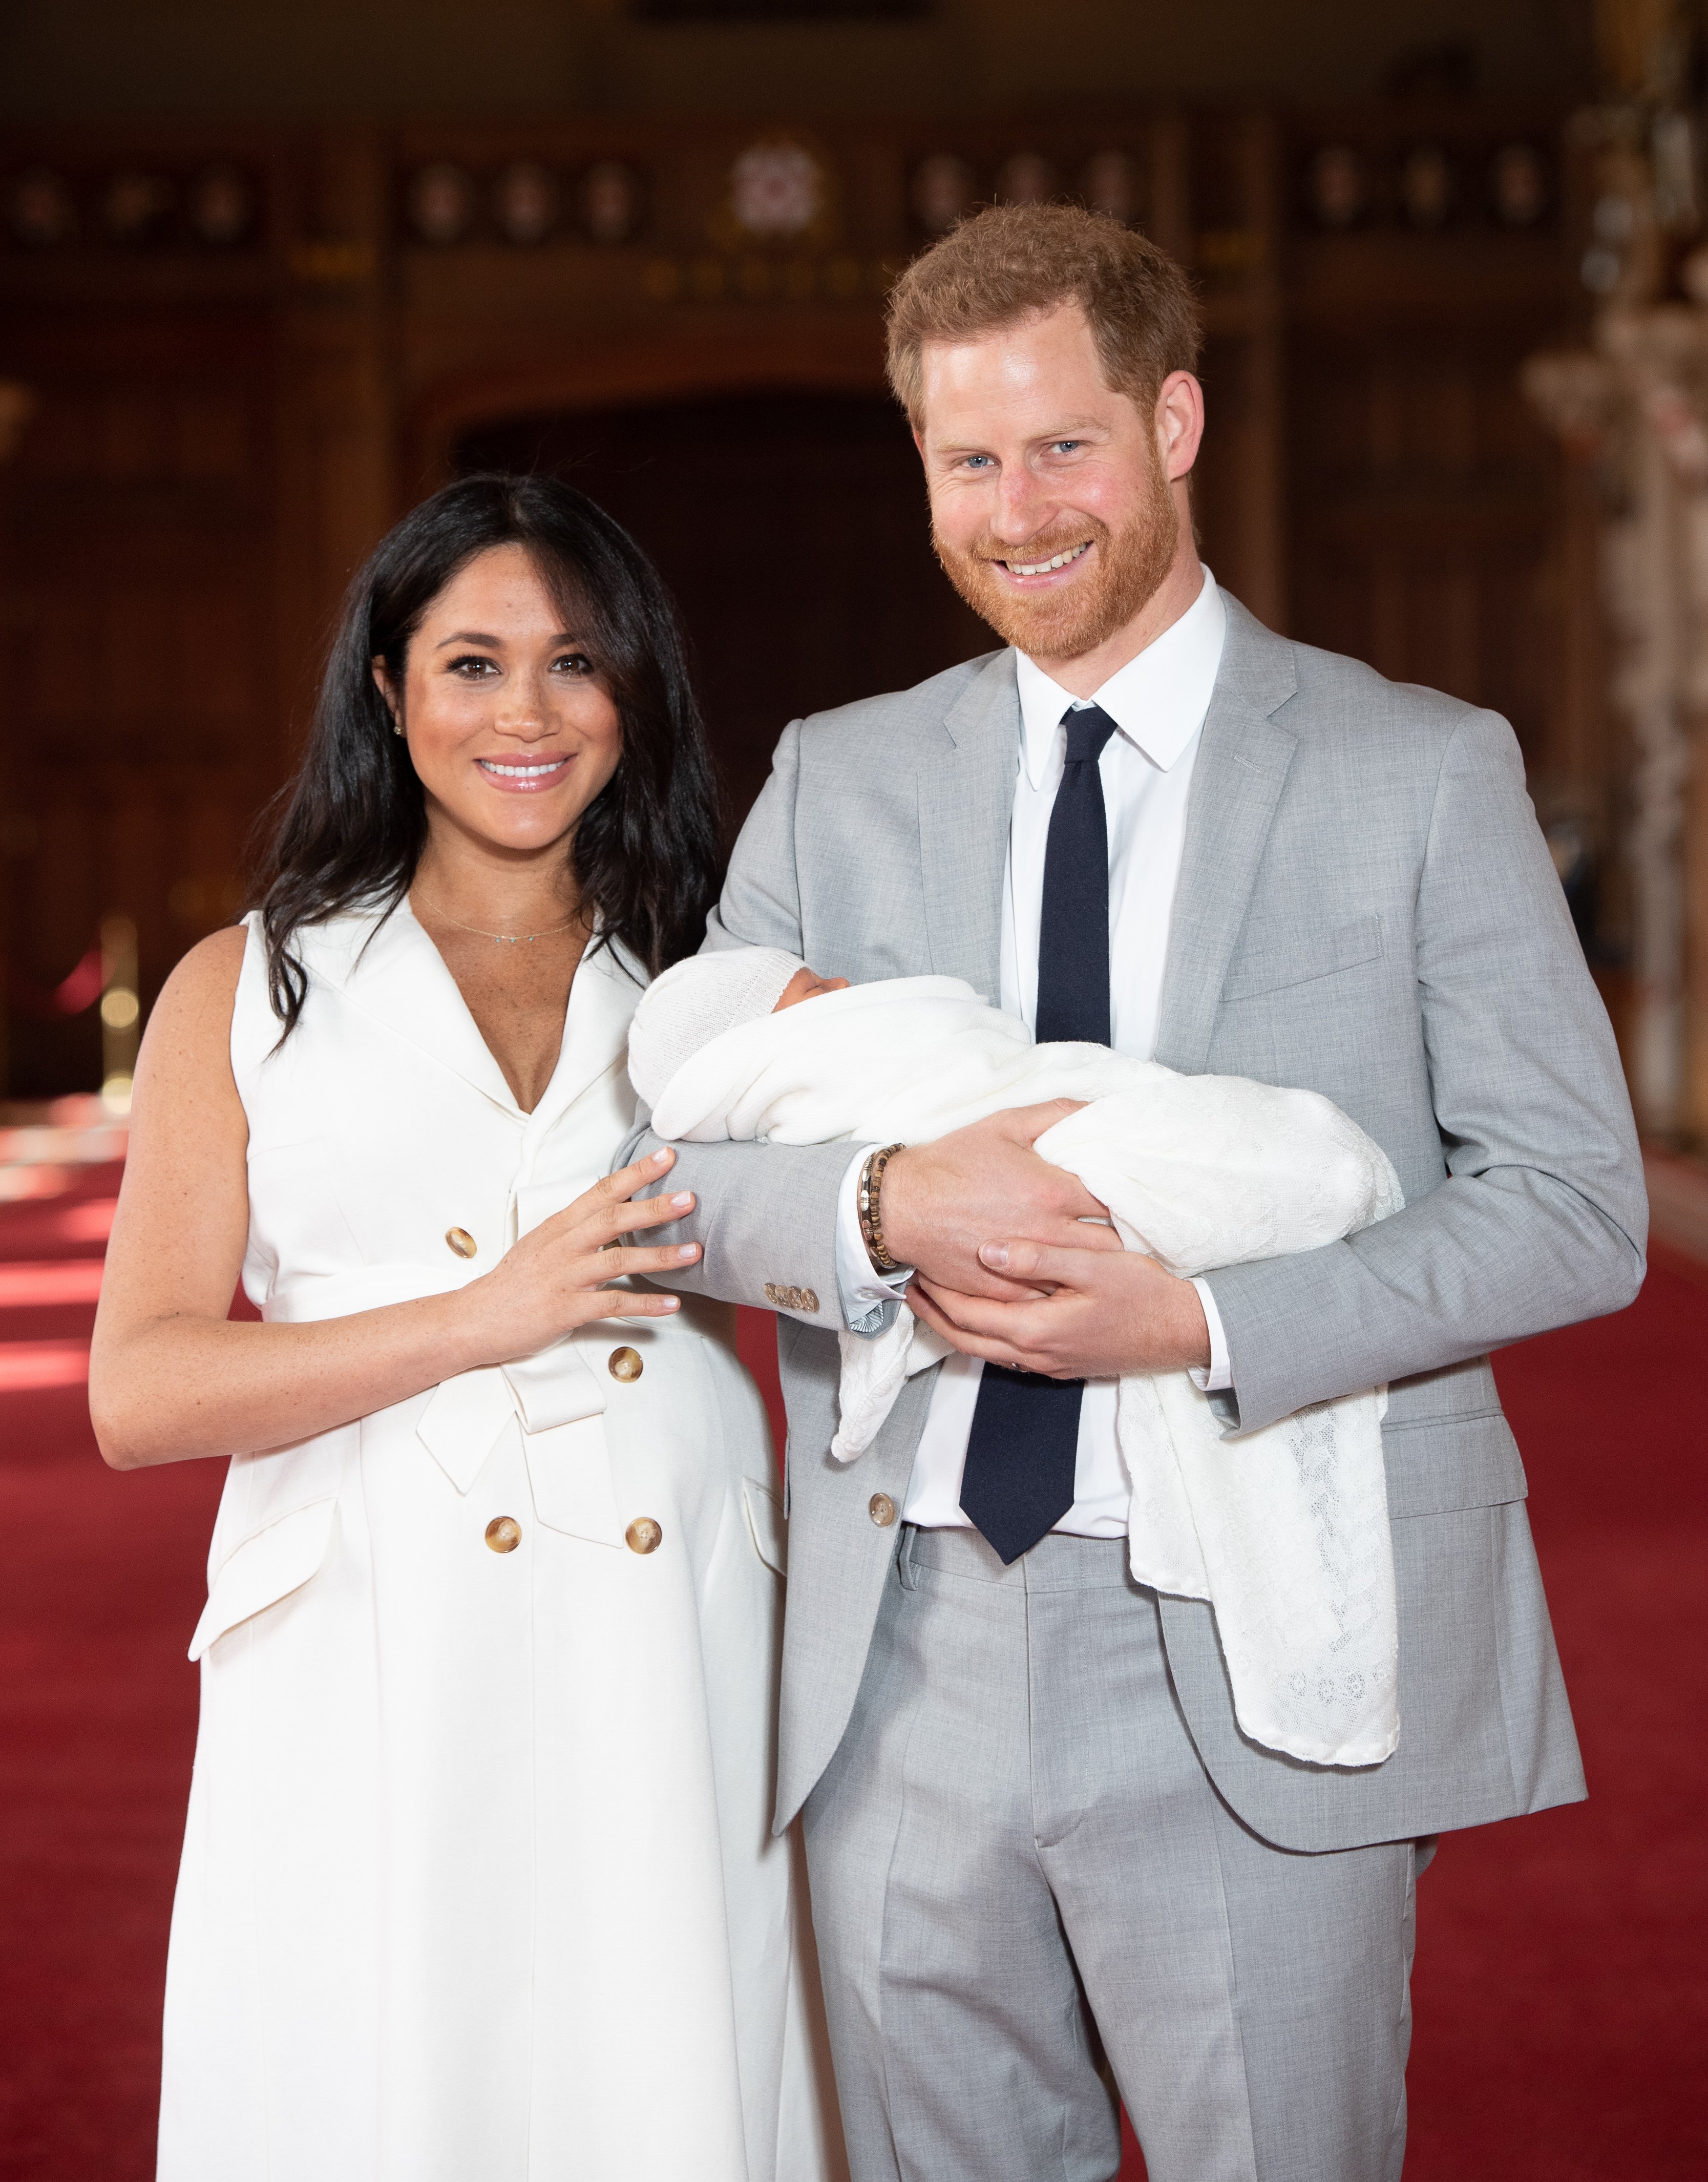 Prince Harry and Meghan Markle introduce Archie Harrison to the world in May 2019 | Photo: Getty Images